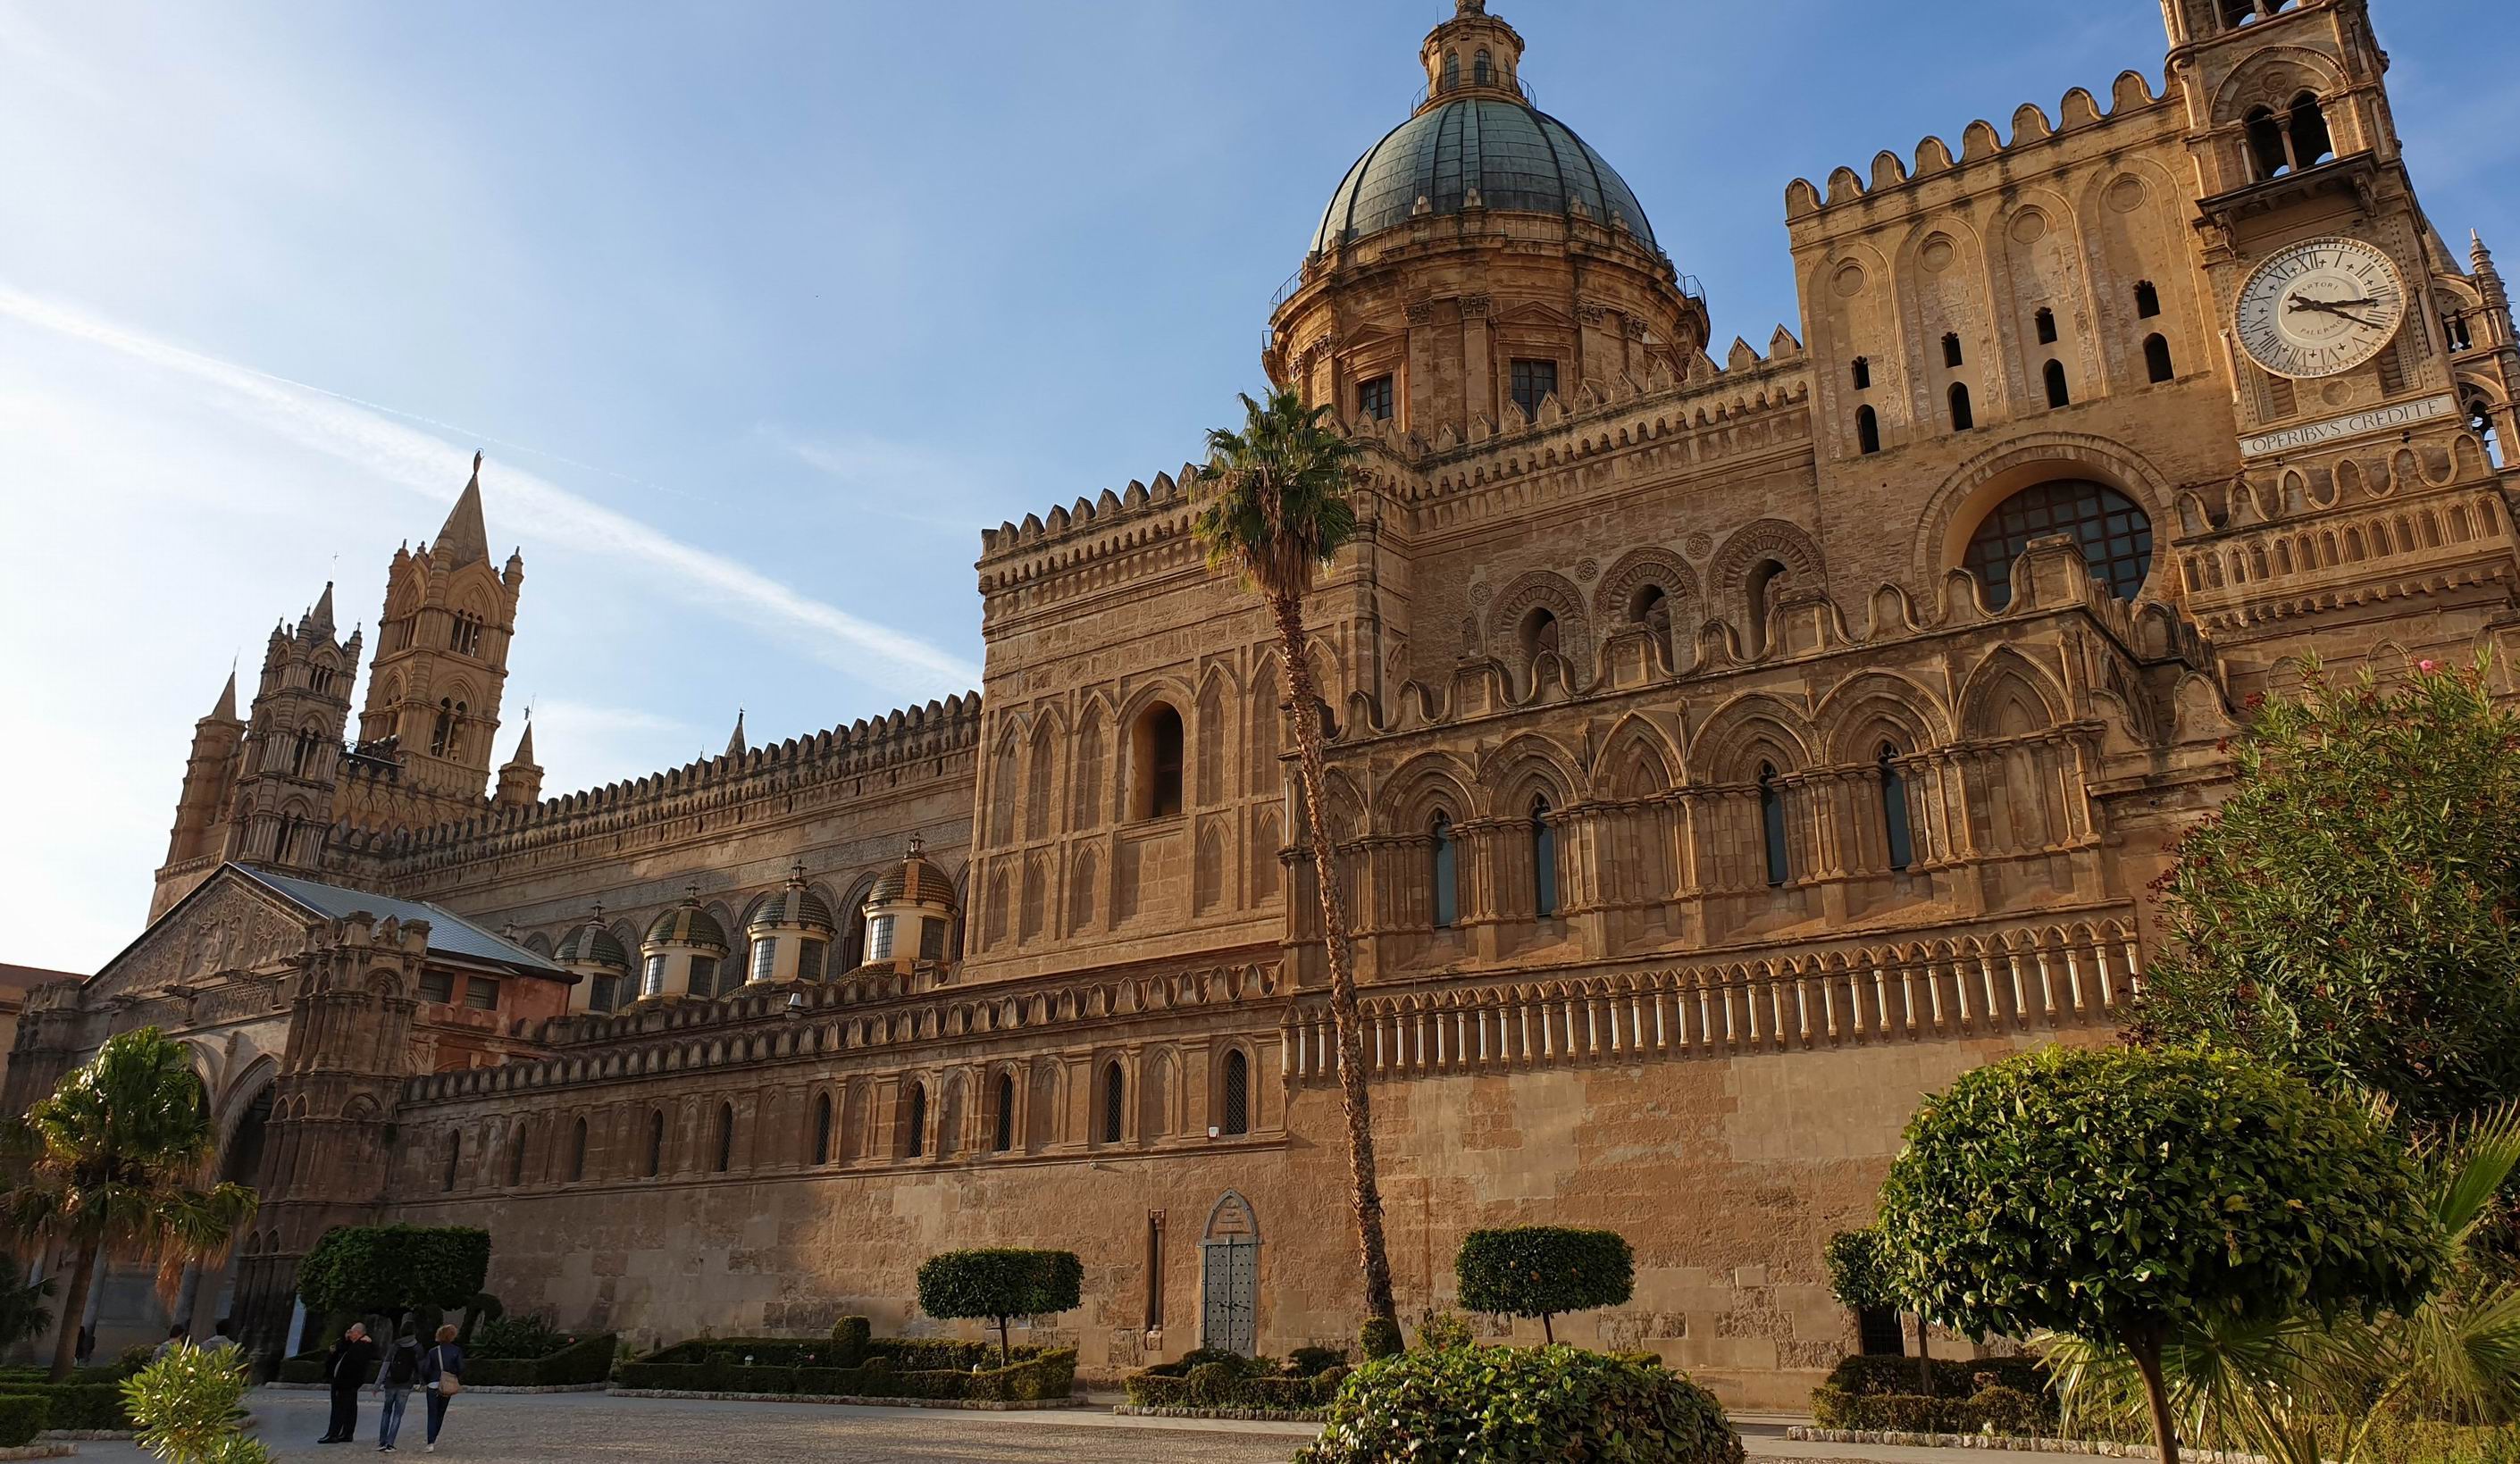 The Time Traveler's Guide to Norman-Arab-Byzantine Palermo